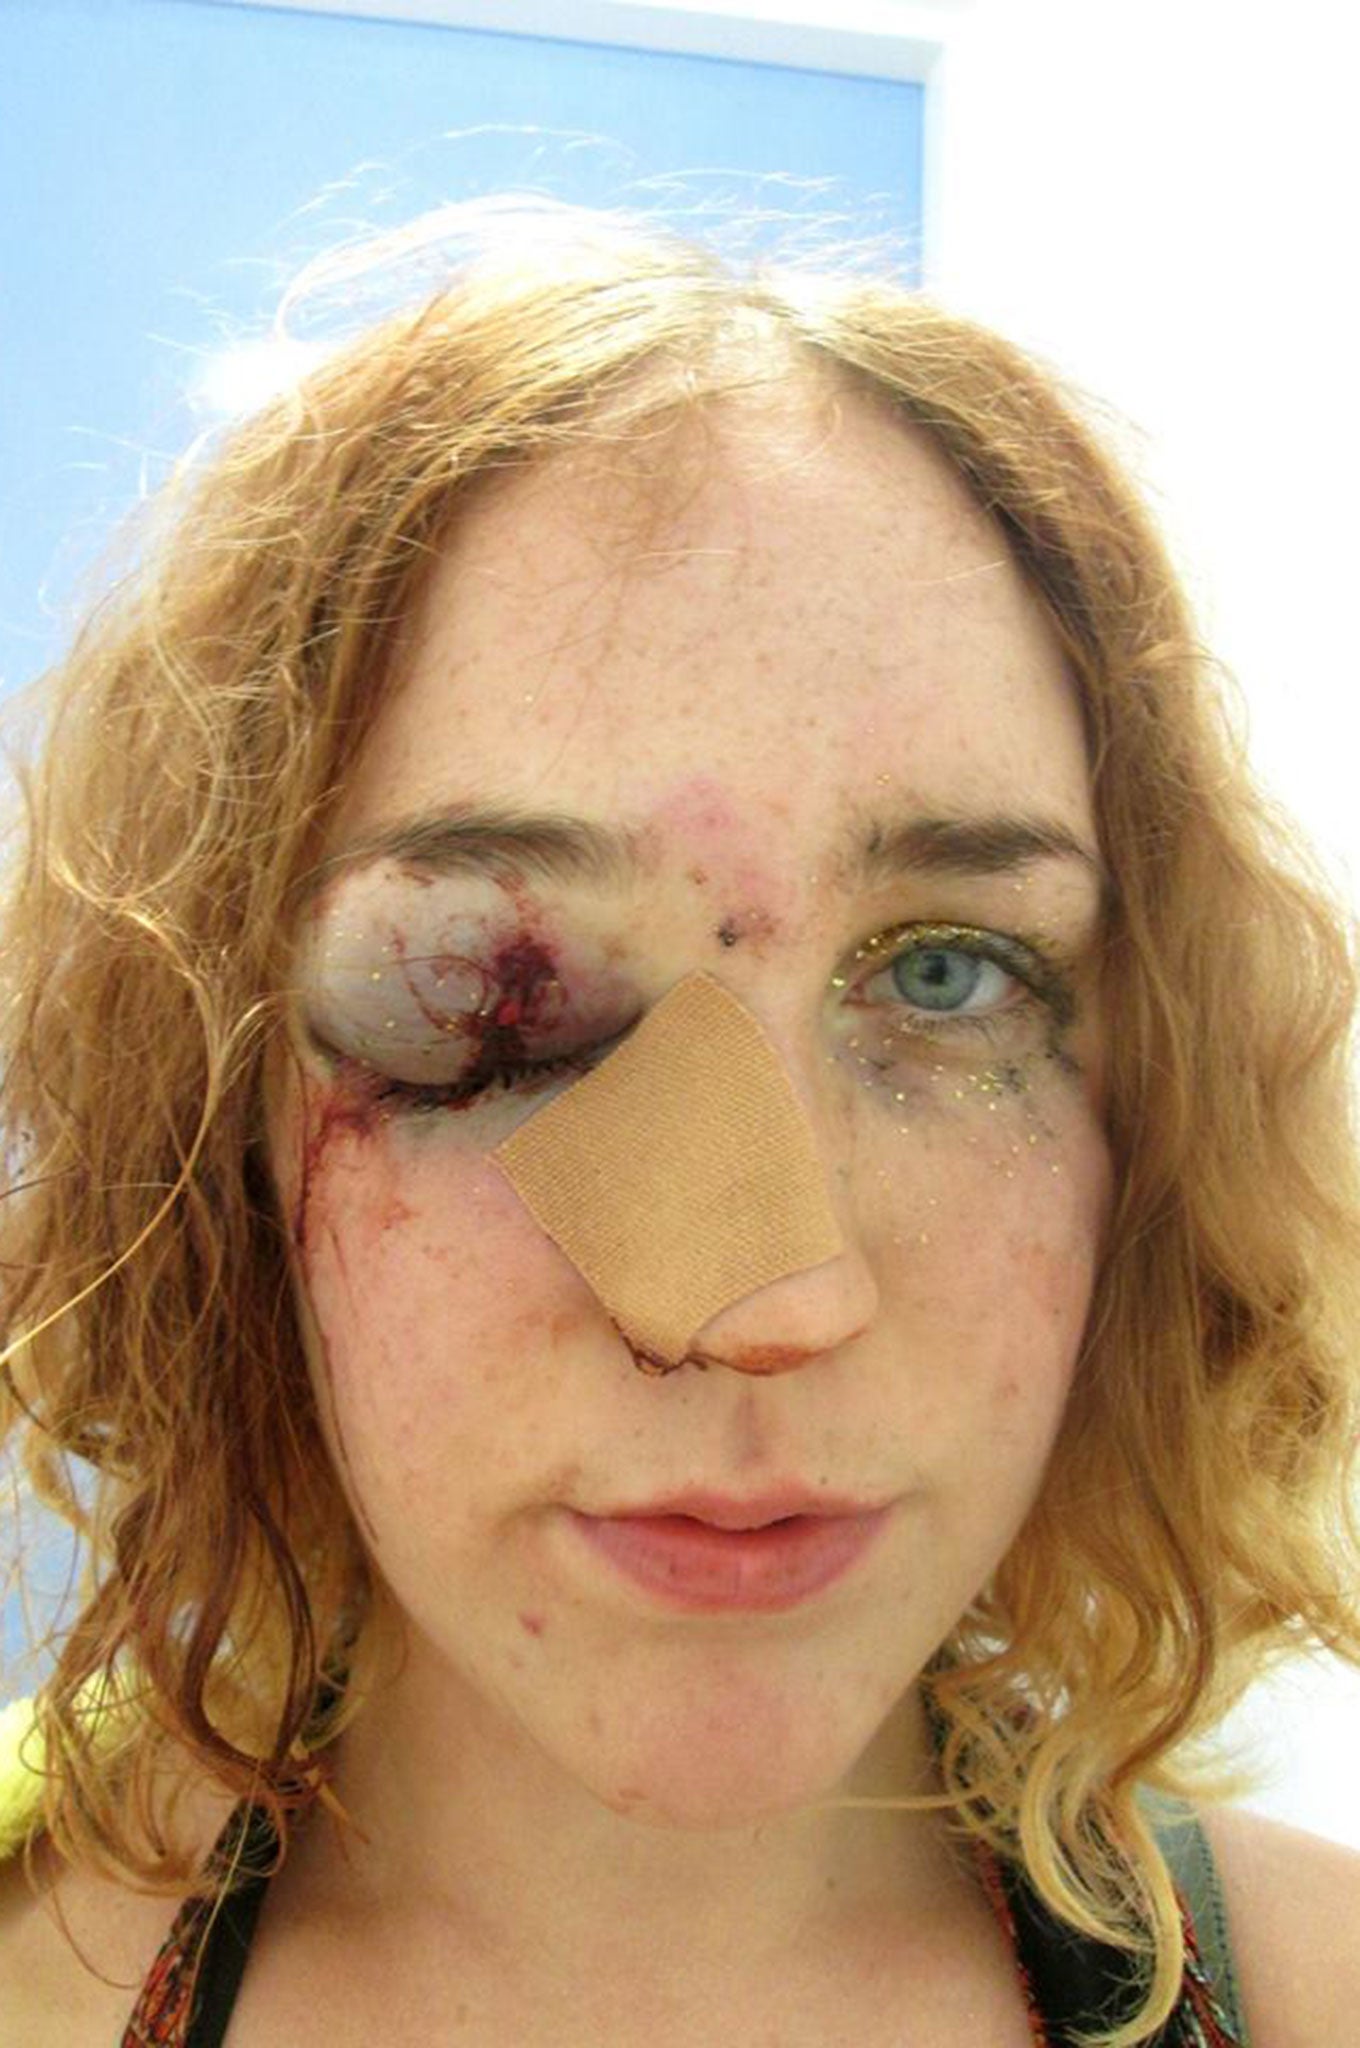 Mary Brandon posted this image to Facebook after she said she was hit in the face for telling a man to stop groping her